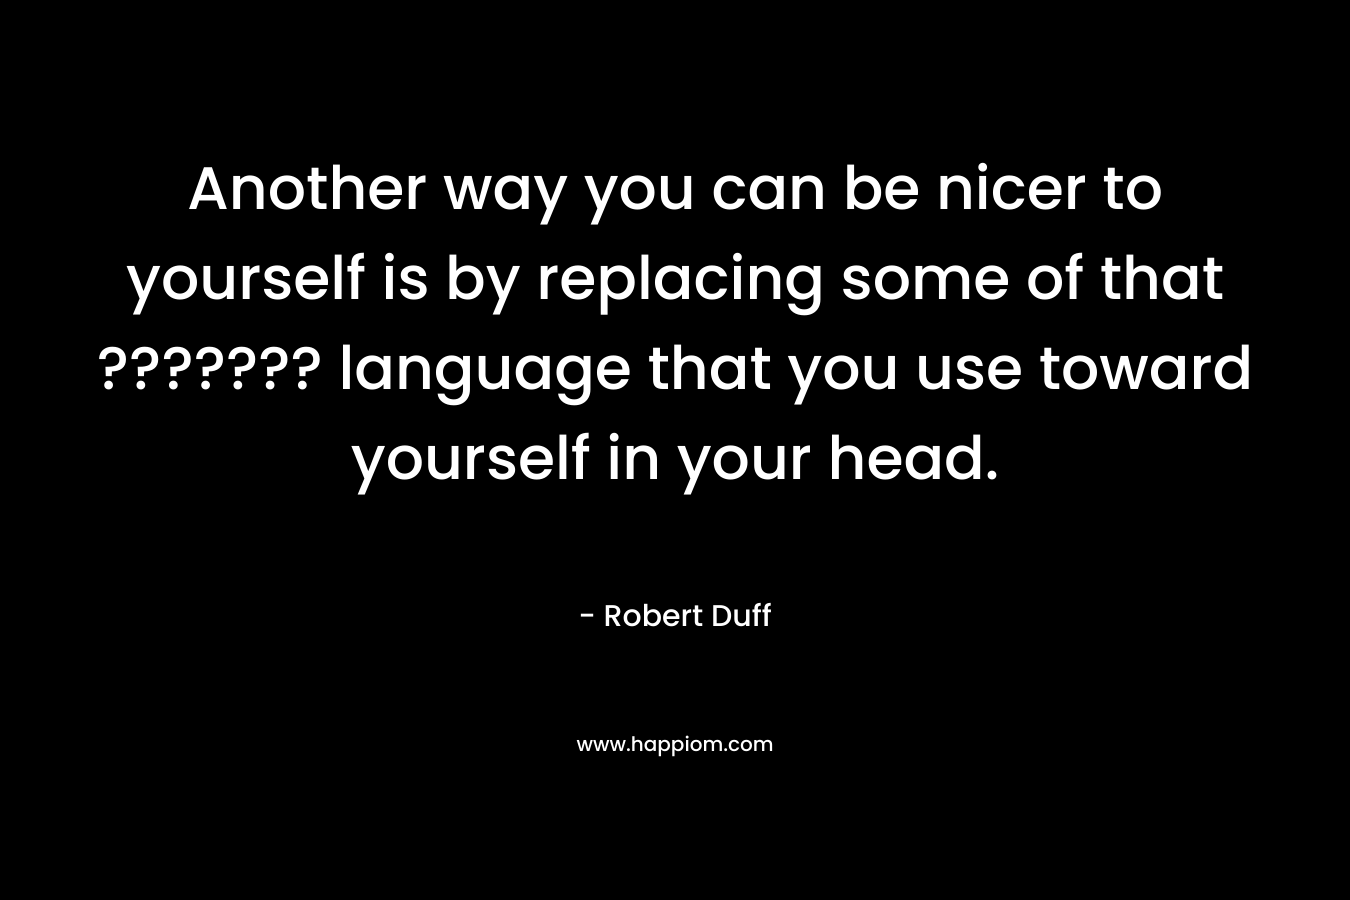 Another way you can be nicer to yourself is by replacing some of that ??????? language that you use toward yourself in your head. – Robert Duff